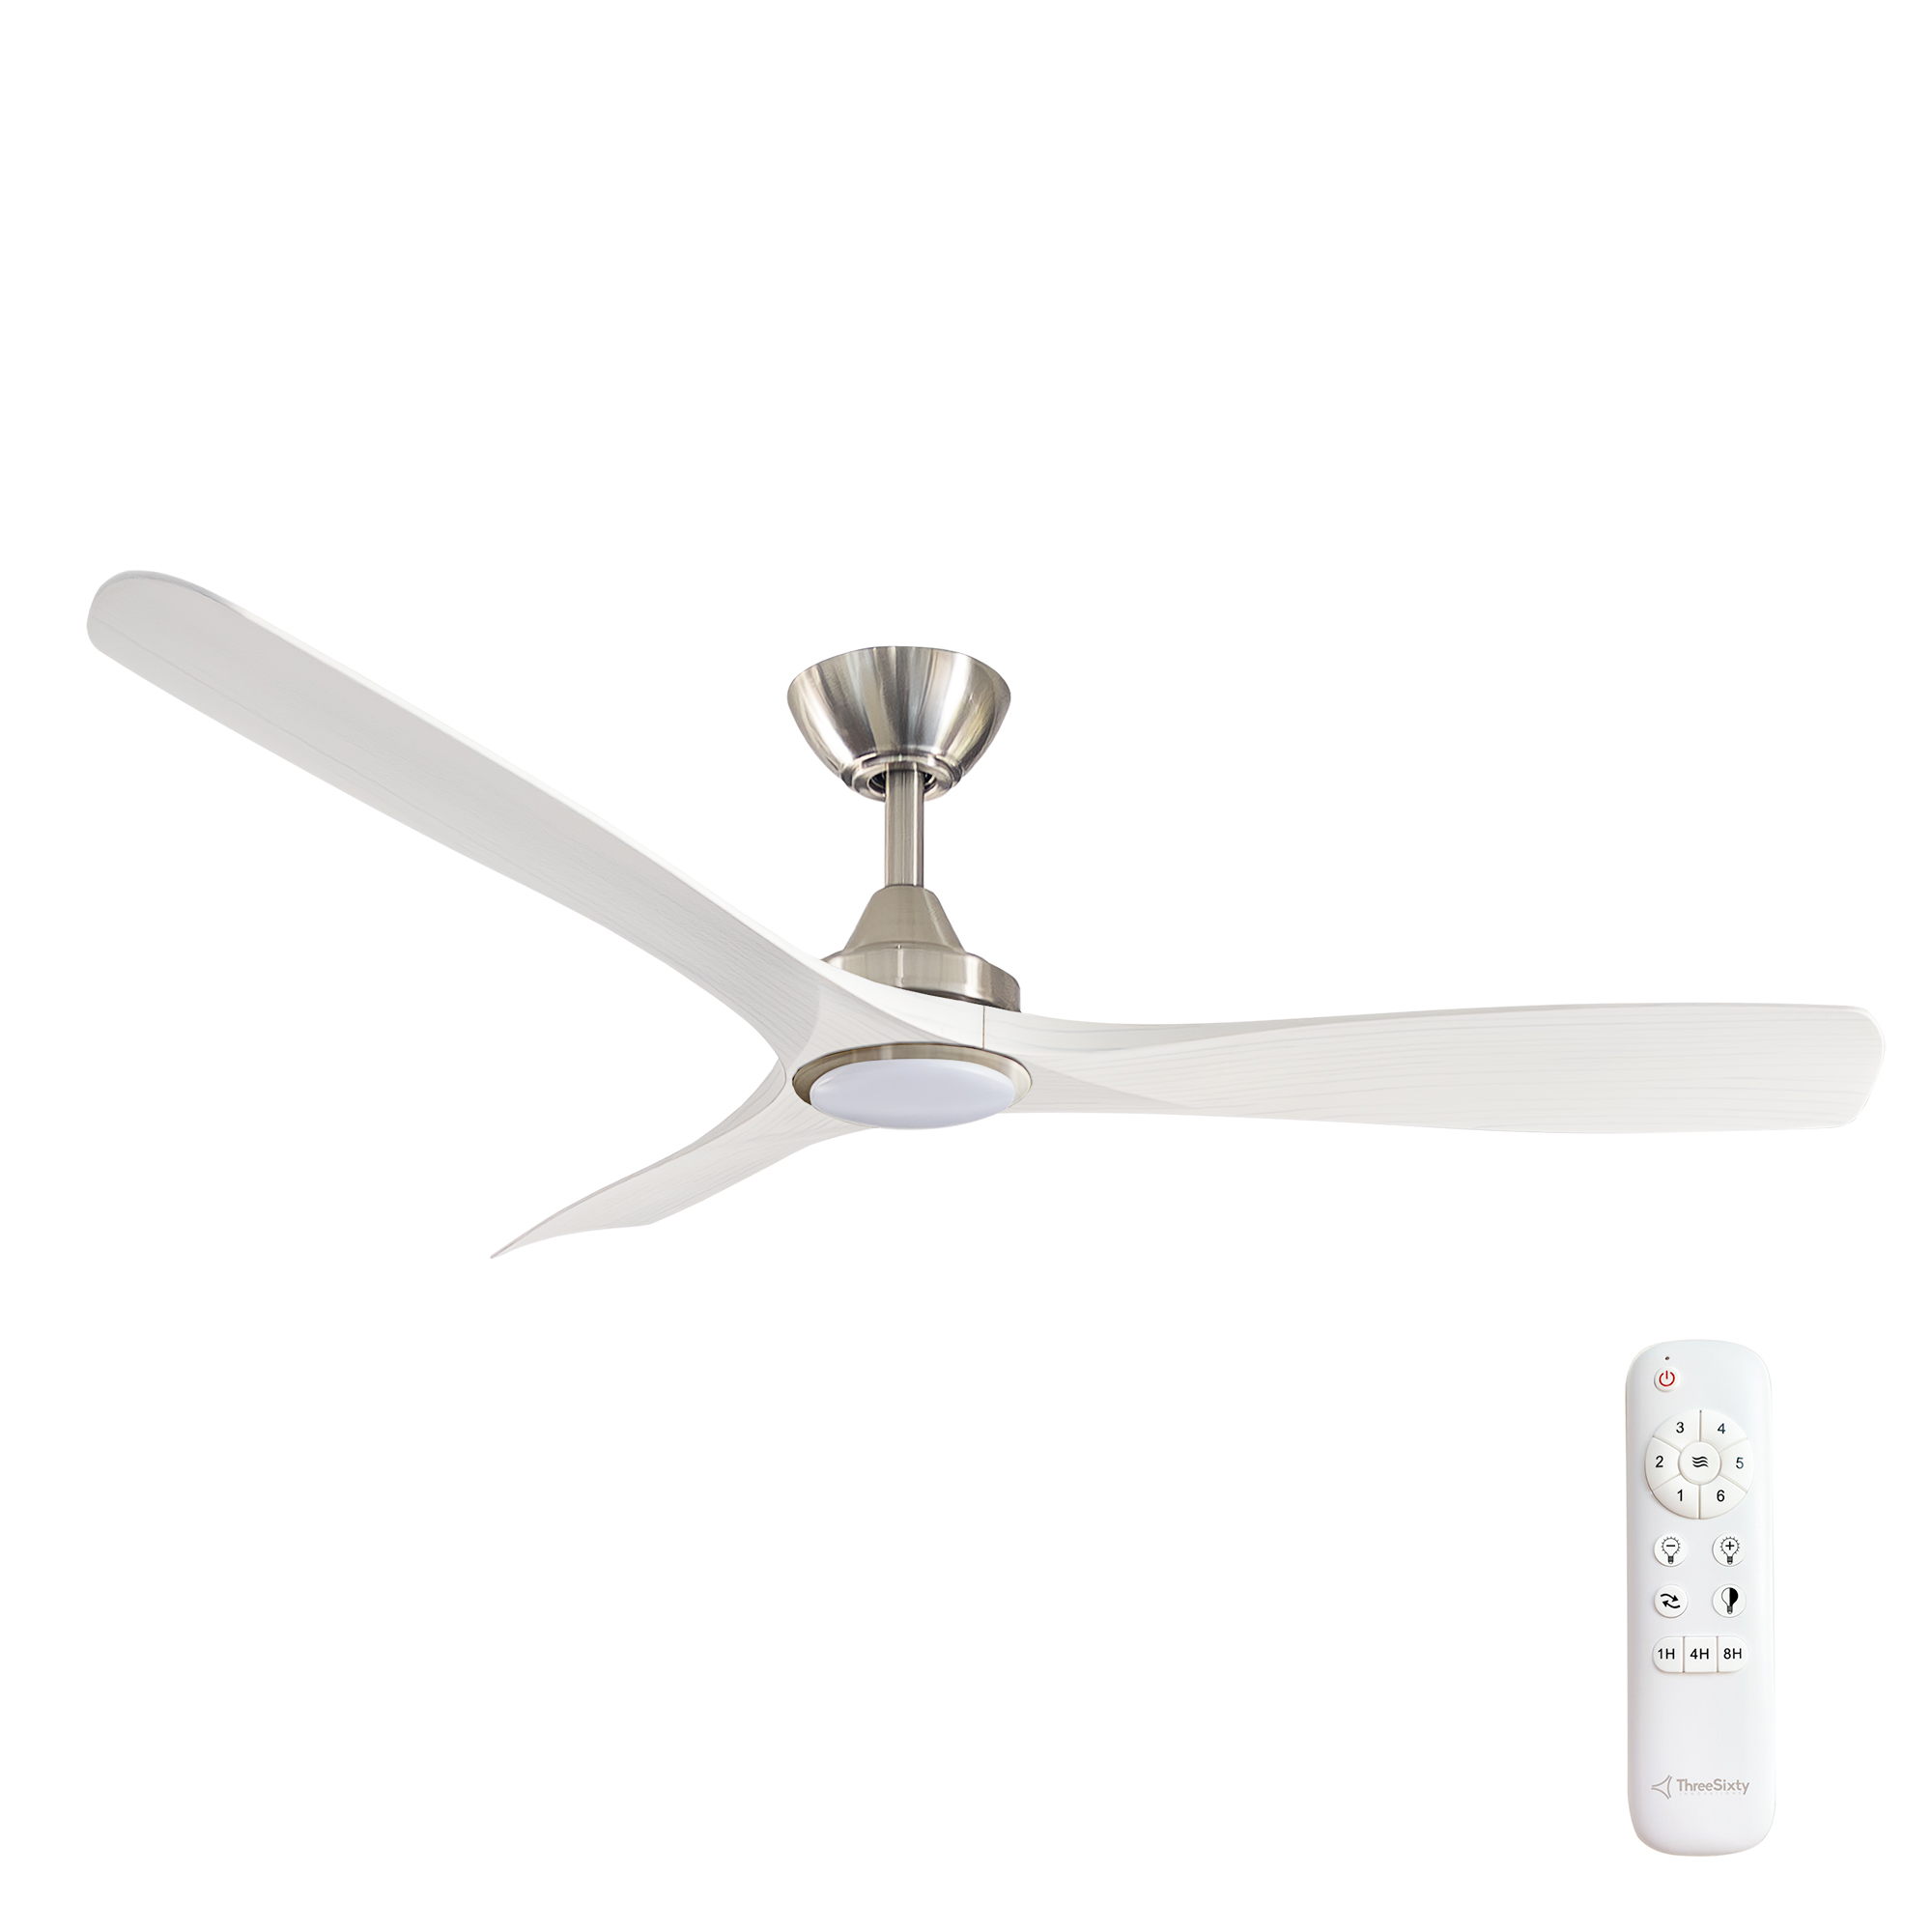 52" Spitfire DC Ceiling Fan in Brushed Nickel with White Wash blades and 18W CCT LED Light